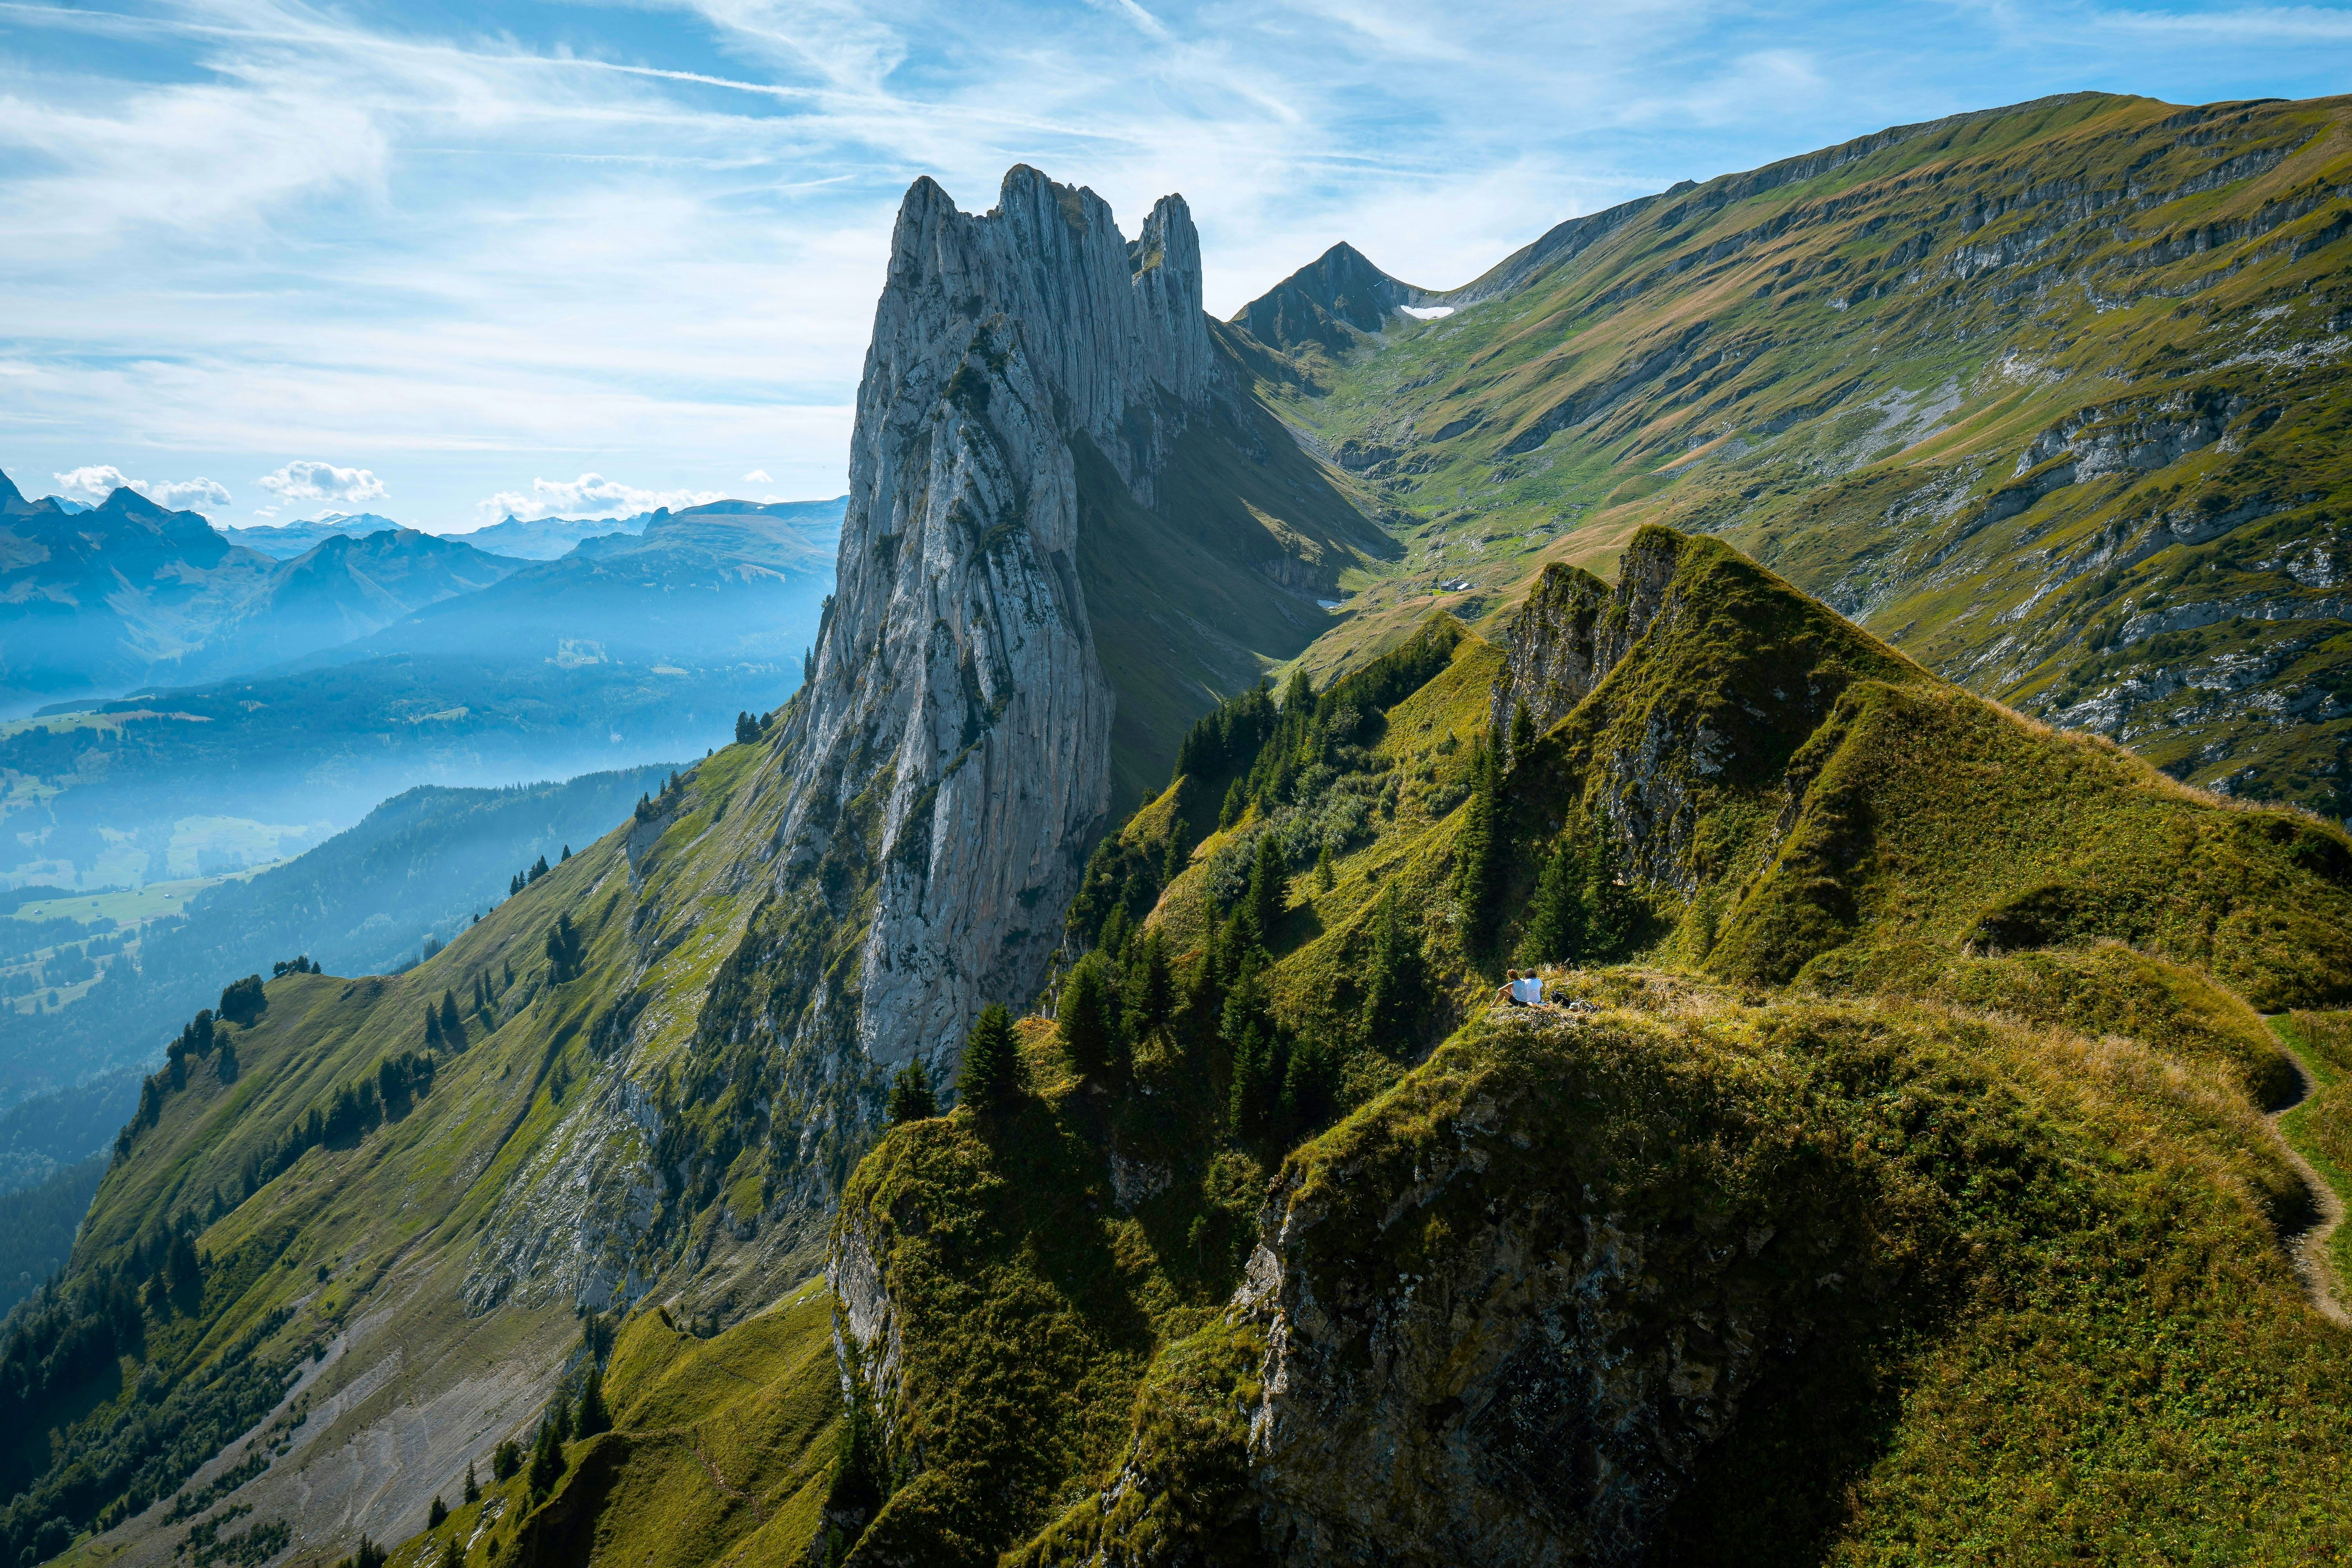 General 6000x4000 nature landscape rocks mountains sky clouds trees grass people mountain top mountain view drone photo Alps Switzerland Pascal Debrunner